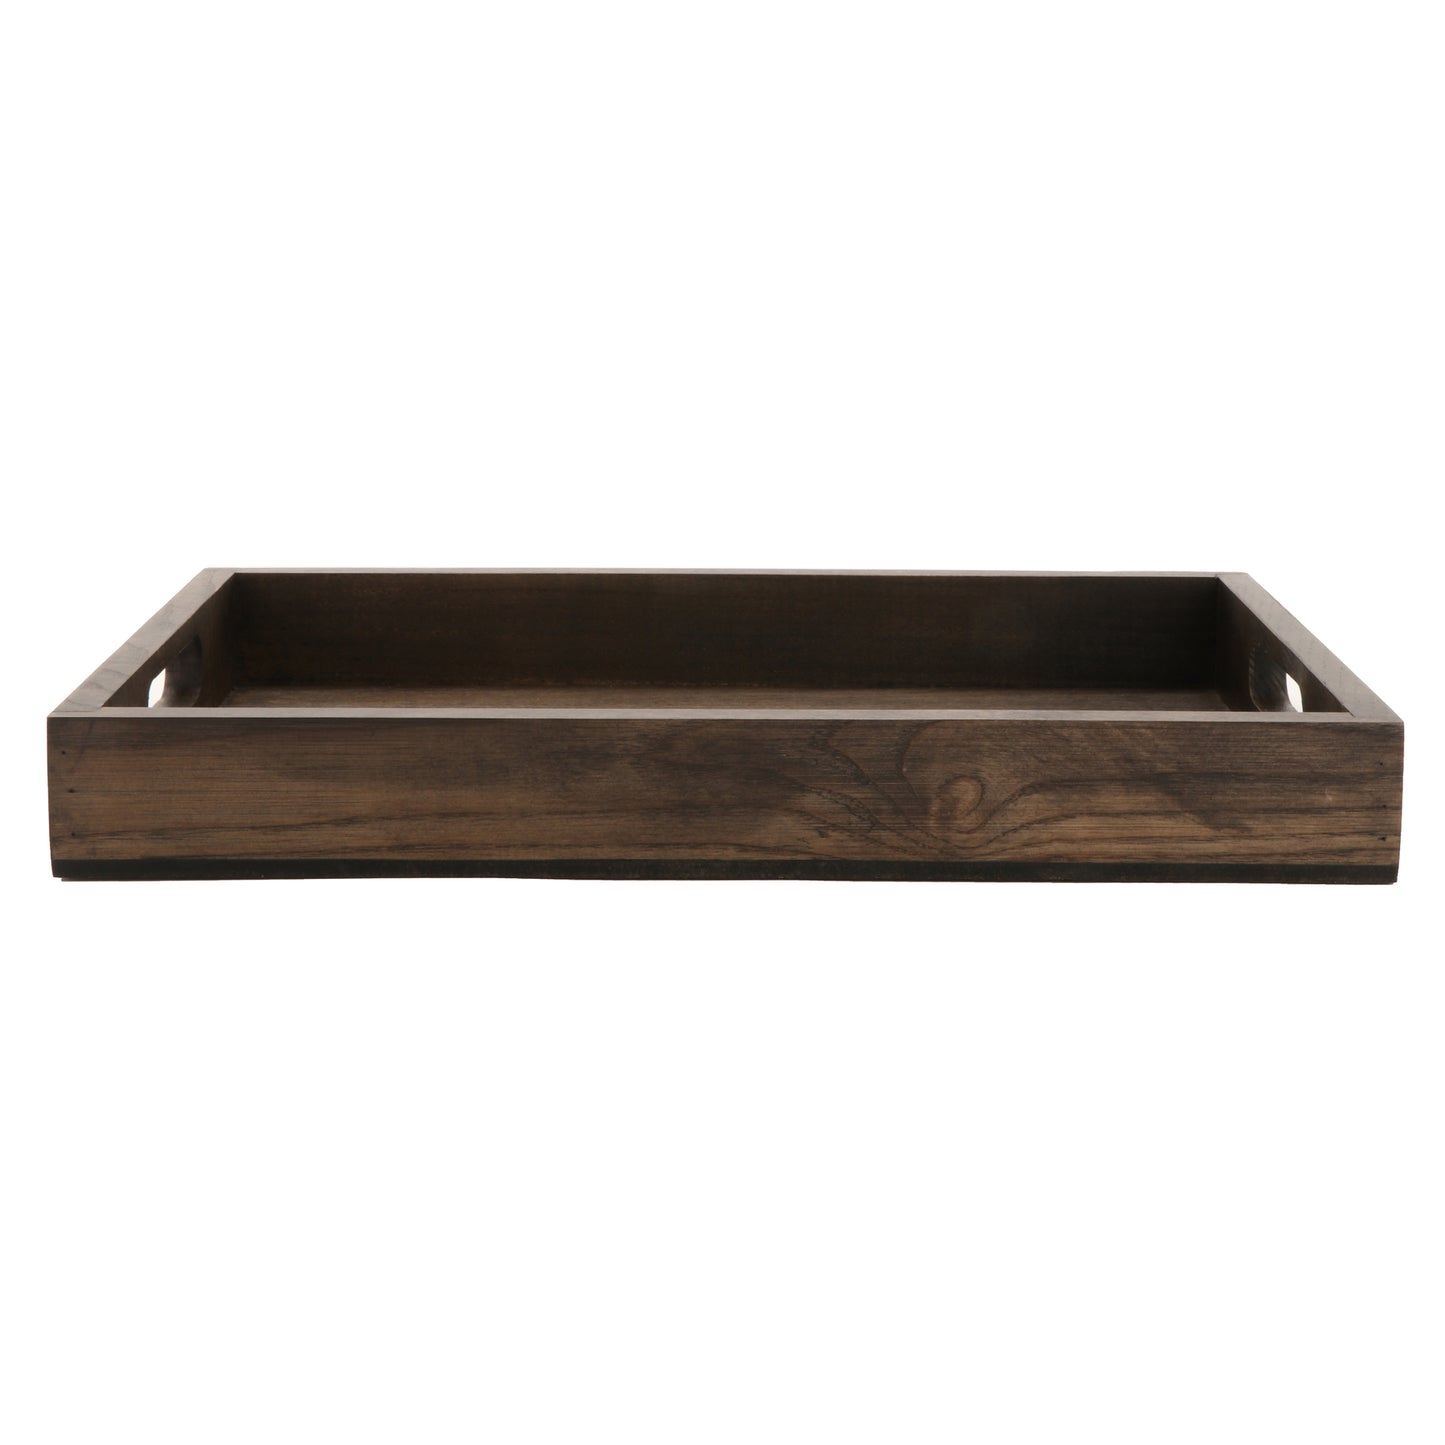 14.25" x 9.5" Small Rectangular Walled Ash Wood Serving Tray with Handles, 1.75" tall, G.E.T. Taproot